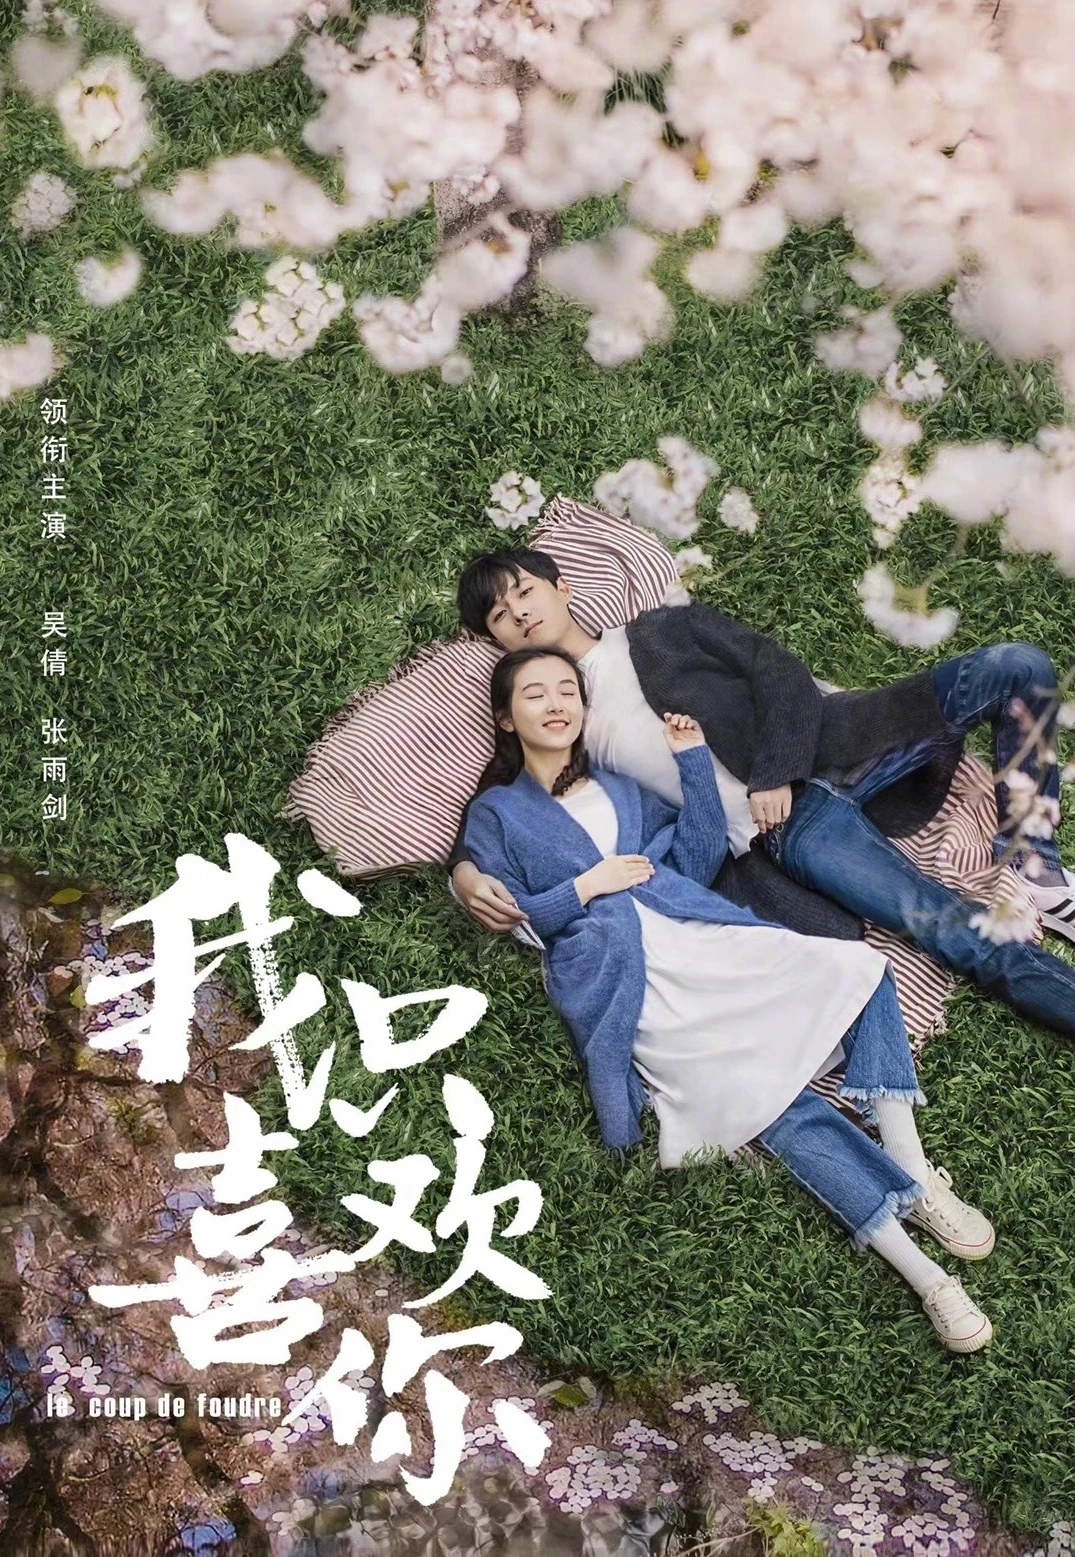 Anh Chỉ Thích Em | I Don't Like This World -  I Only Like You (2019)